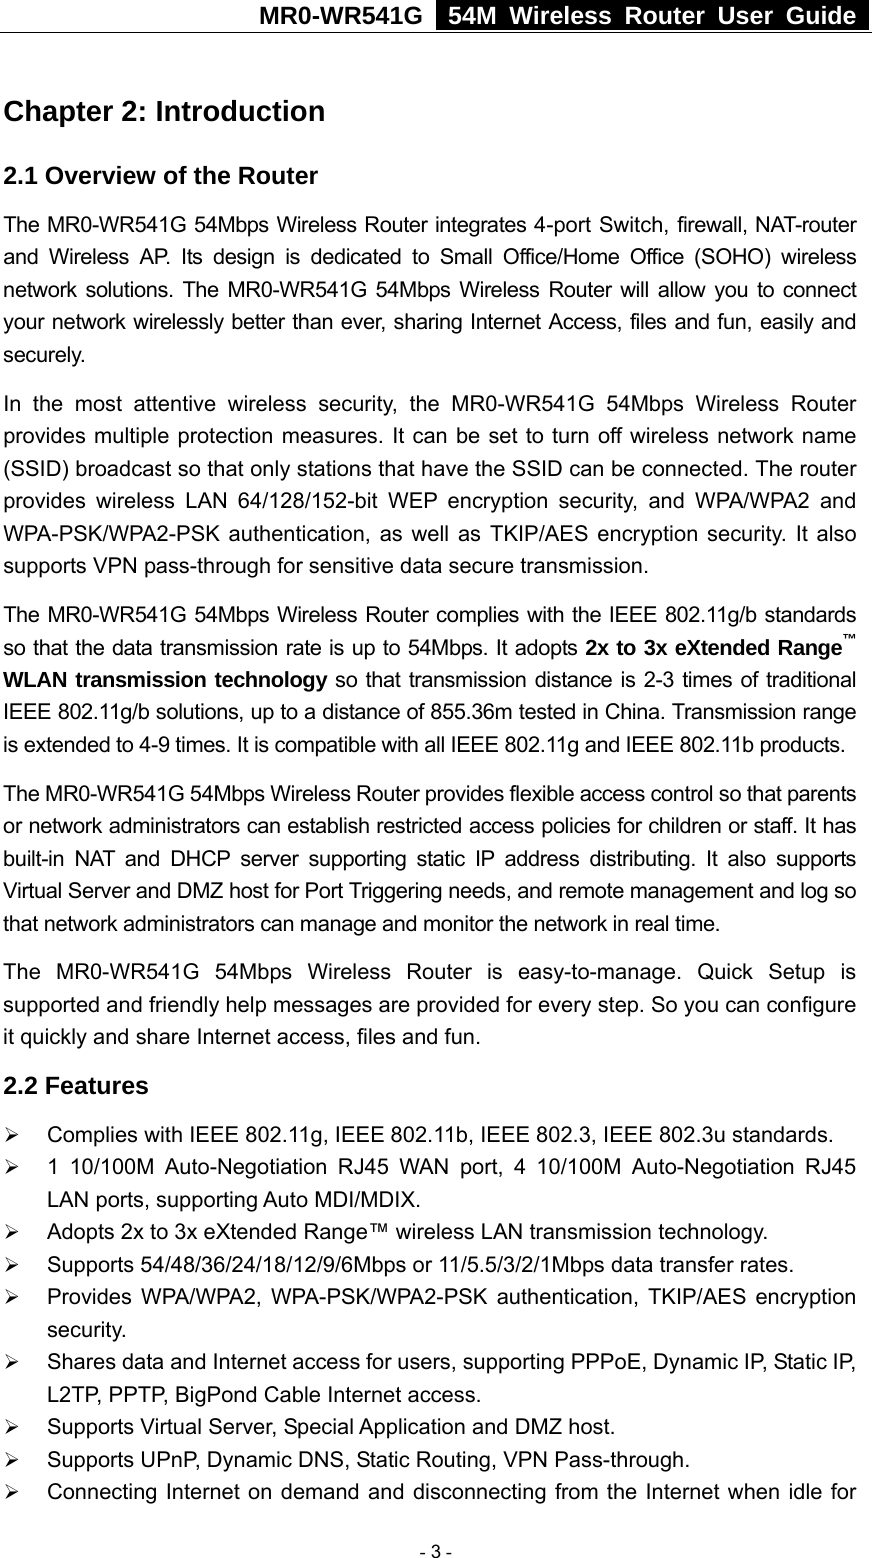 MR0-WR541G   54M Wireless Router User Guide  Chapter 2: Introduction 2.1 Overview of the Router The MR0-WR541G 54Mbps Wireless Router integrates 4-port Switch, firewall, NAT-router and Wireless AP. Its design is dedicated to Small Office/Home Office (SOHO) wireless network solutions. The MR0-WR541G 54Mbps Wireless Router will allow you to connect your network wirelessly better than ever, sharing Internet Access, files and fun, easily and securely. In the most attentive wireless security, the MR0-WR541G 54Mbps Wireless Router provides multiple protection measures. It can be set to turn off wireless network name (SSID) broadcast so that only stations that have the SSID can be connected. The router provides wireless LAN 64/128/152-bit WEP encryption security, and WPA/WPA2 and WPA-PSK/WPA2-PSK authentication, as well as TKIP/AES encryption security. It also supports VPN pass-through for sensitive data secure transmission. The MR0-WR541G 54Mbps Wireless Router complies with the IEEE 802.11g/b standards so that the data transmission rate is up to 54Mbps. It adopts 2x to 3x eXtended Range™ WLAN transmission technology so that transmission distance is 2-3 times of traditional IEEE 802.11g/b solutions, up to a distance of 855.36m tested in China. Transmission range is extended to 4-9 times. It is compatible with all IEEE 802.11g and IEEE 802.11b products. The MR0-WR541G 54Mbps Wireless Router provides flexible access control so that parents or network administrators can establish restricted access policies for children or staff. It has built-in NAT and DHCP server supporting static IP address distributing. It also supports Virtual Server and DMZ host for Port Triggering needs, and remote management and log so that network administrators can manage and monitor the network in real time.   The MR0-WR541G 54Mbps Wireless Router is easy-to-manage. Quick Setup is supported and friendly help messages are provided for every step. So you can configure it quickly and share Internet access, files and fun. 2.2 Features ¾ Complies with IEEE 802.11g, IEEE 802.11b, IEEE 802.3, IEEE 802.3u standards. ¾ 1 10/100M Auto-Negotiation RJ45 WAN port, 4 10/100M Auto-Negotiation RJ45 LAN ports, supporting Auto MDI/MDIX. ¾ Adopts 2x to 3x eXtended Range™ wireless LAN transmission technology. ¾ Supports 54/48/36/24/18/12/9/6Mbps or 11/5.5/3/2/1Mbps data transfer rates. ¾ Provides WPA/WPA2, WPA-PSK/WPA2-PSK authentication, TKIP/AES encryption security. ¾ Shares data and Internet access for users, supporting PPPoE, Dynamic IP, Static IP, L2TP, PPTP, BigPond Cable Internet access. ¾ Supports Virtual Server, Special Application and DMZ host. ¾ Supports UPnP, Dynamic DNS, Static Routing, VPN Pass-through. ¾ Connecting Internet on demand and disconnecting from the Internet when idle for  - 3 - 